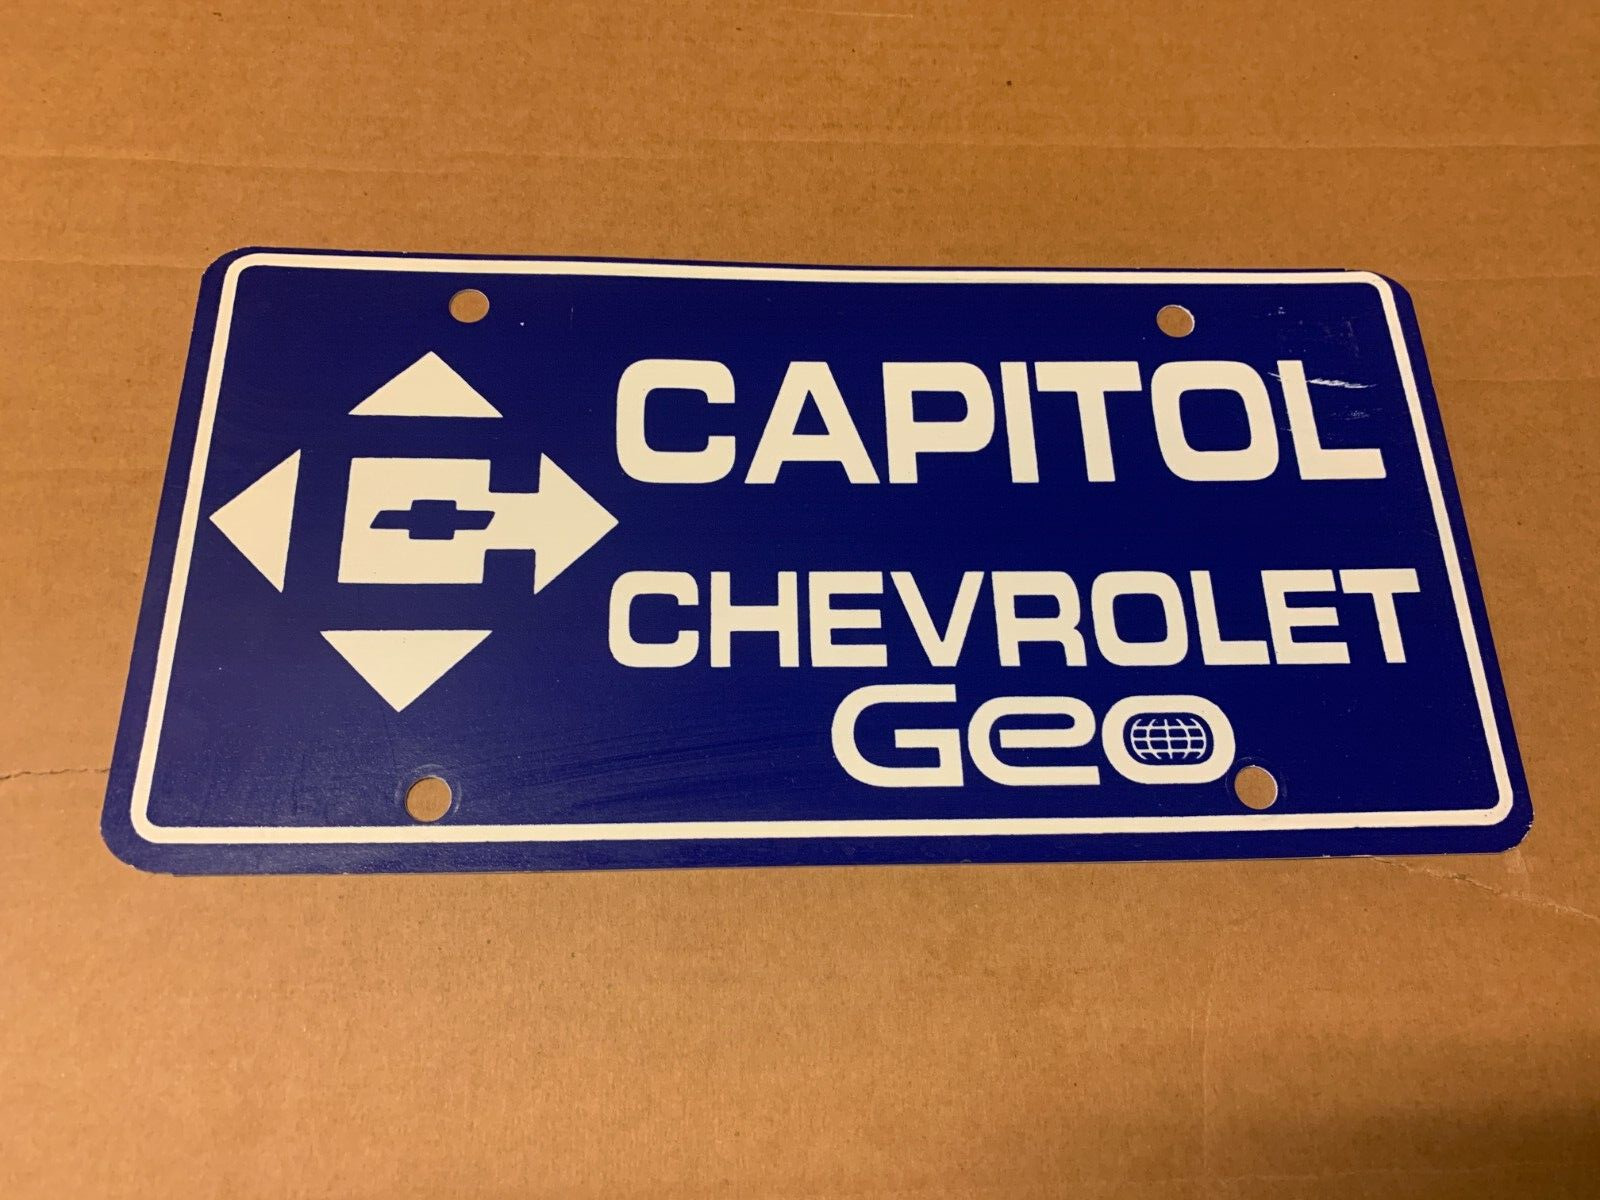 Capitol Chevrolet Geo Georgetown Tx. Automobile Dealership Booster License Plate